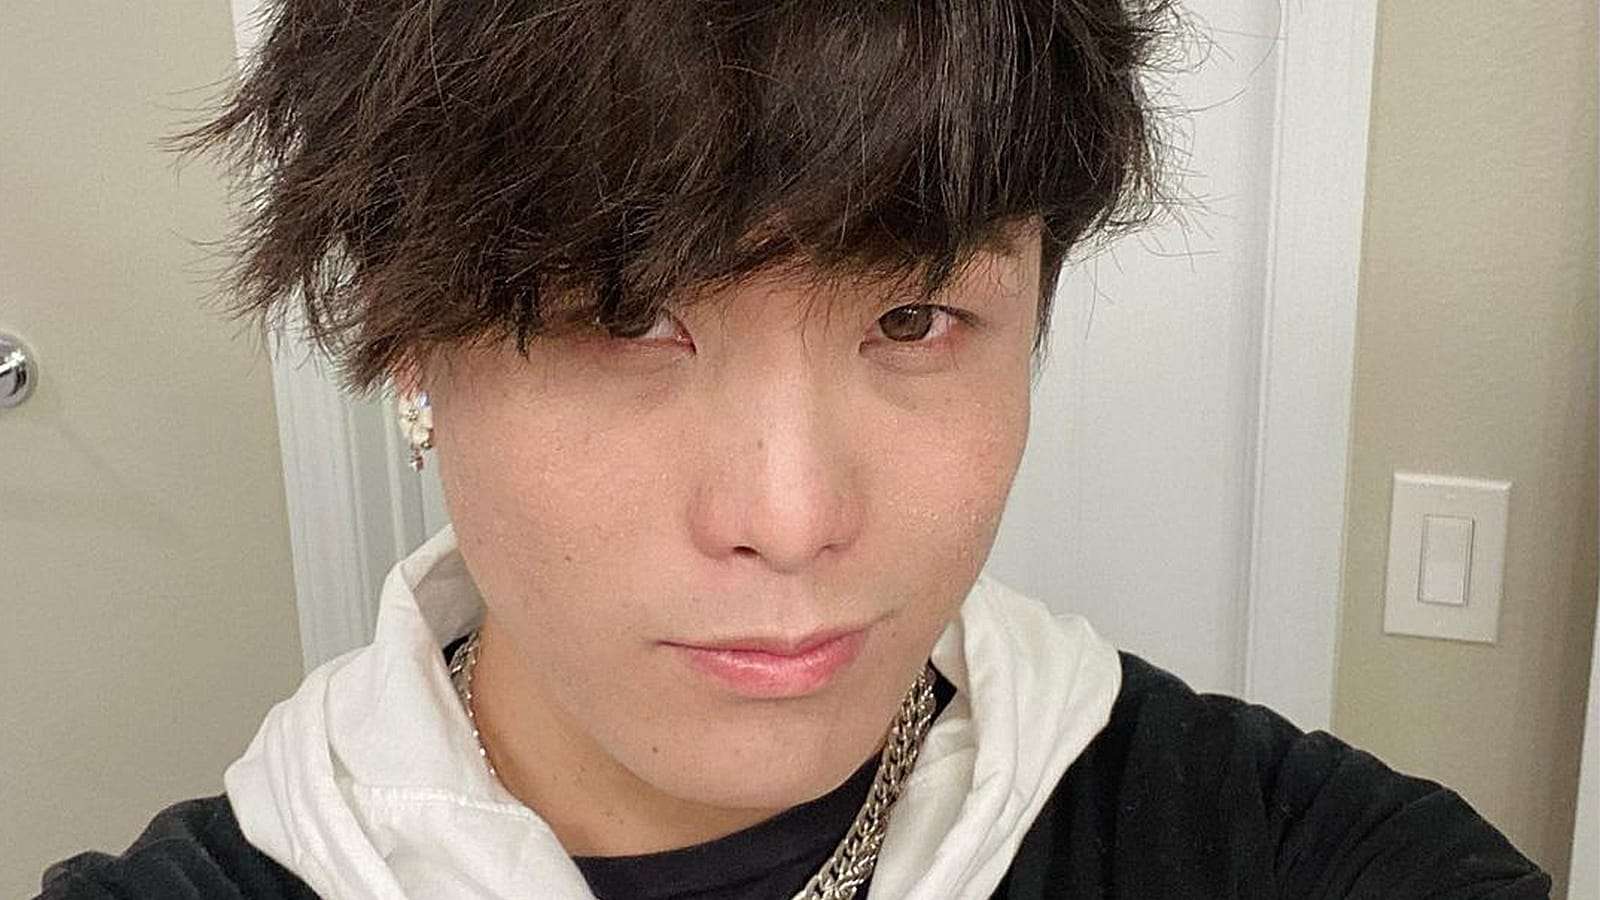 Sykkuno turns tables on troll accusing him of flexing wealth